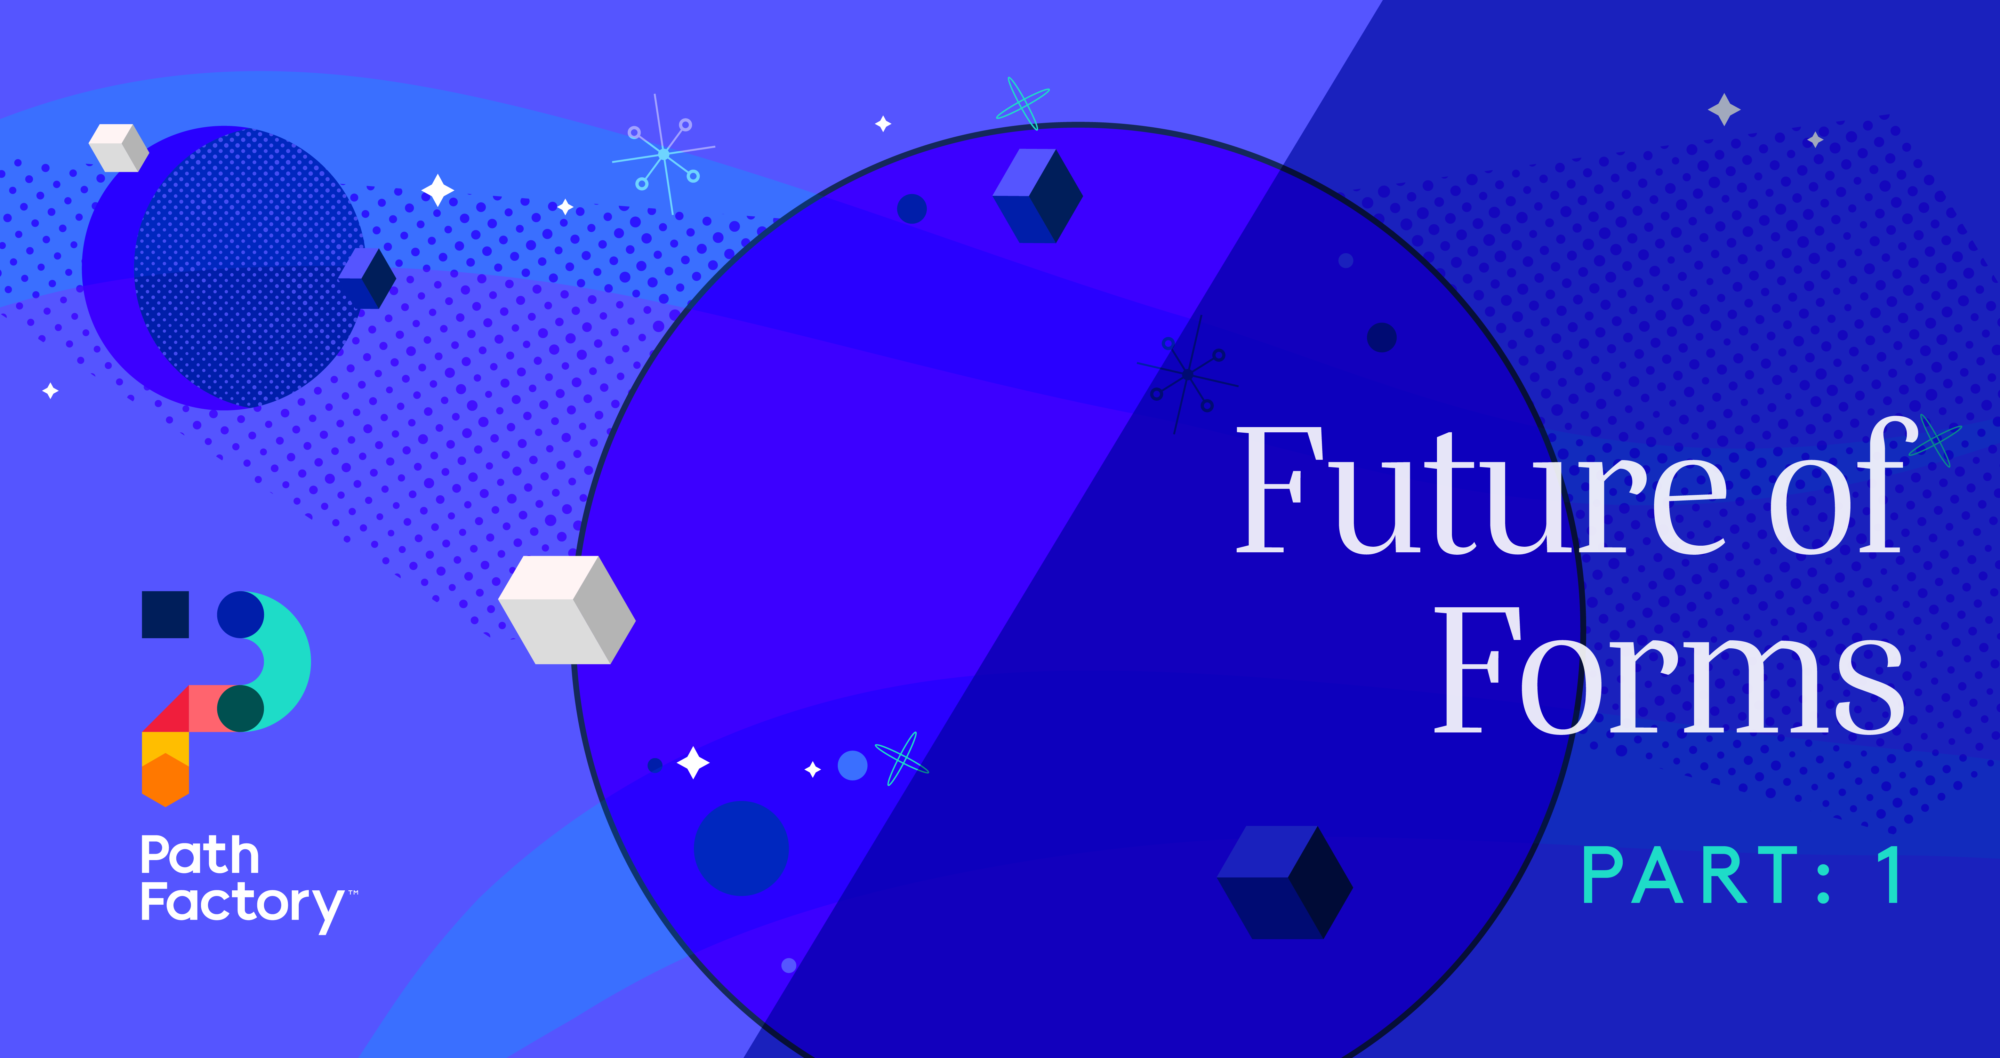 Blue Circles and White cubes on a two toned Blue Background, with the PathFactory Logo on the bottom left and Future of Forms - Part 1 on the right hand middle of the image.